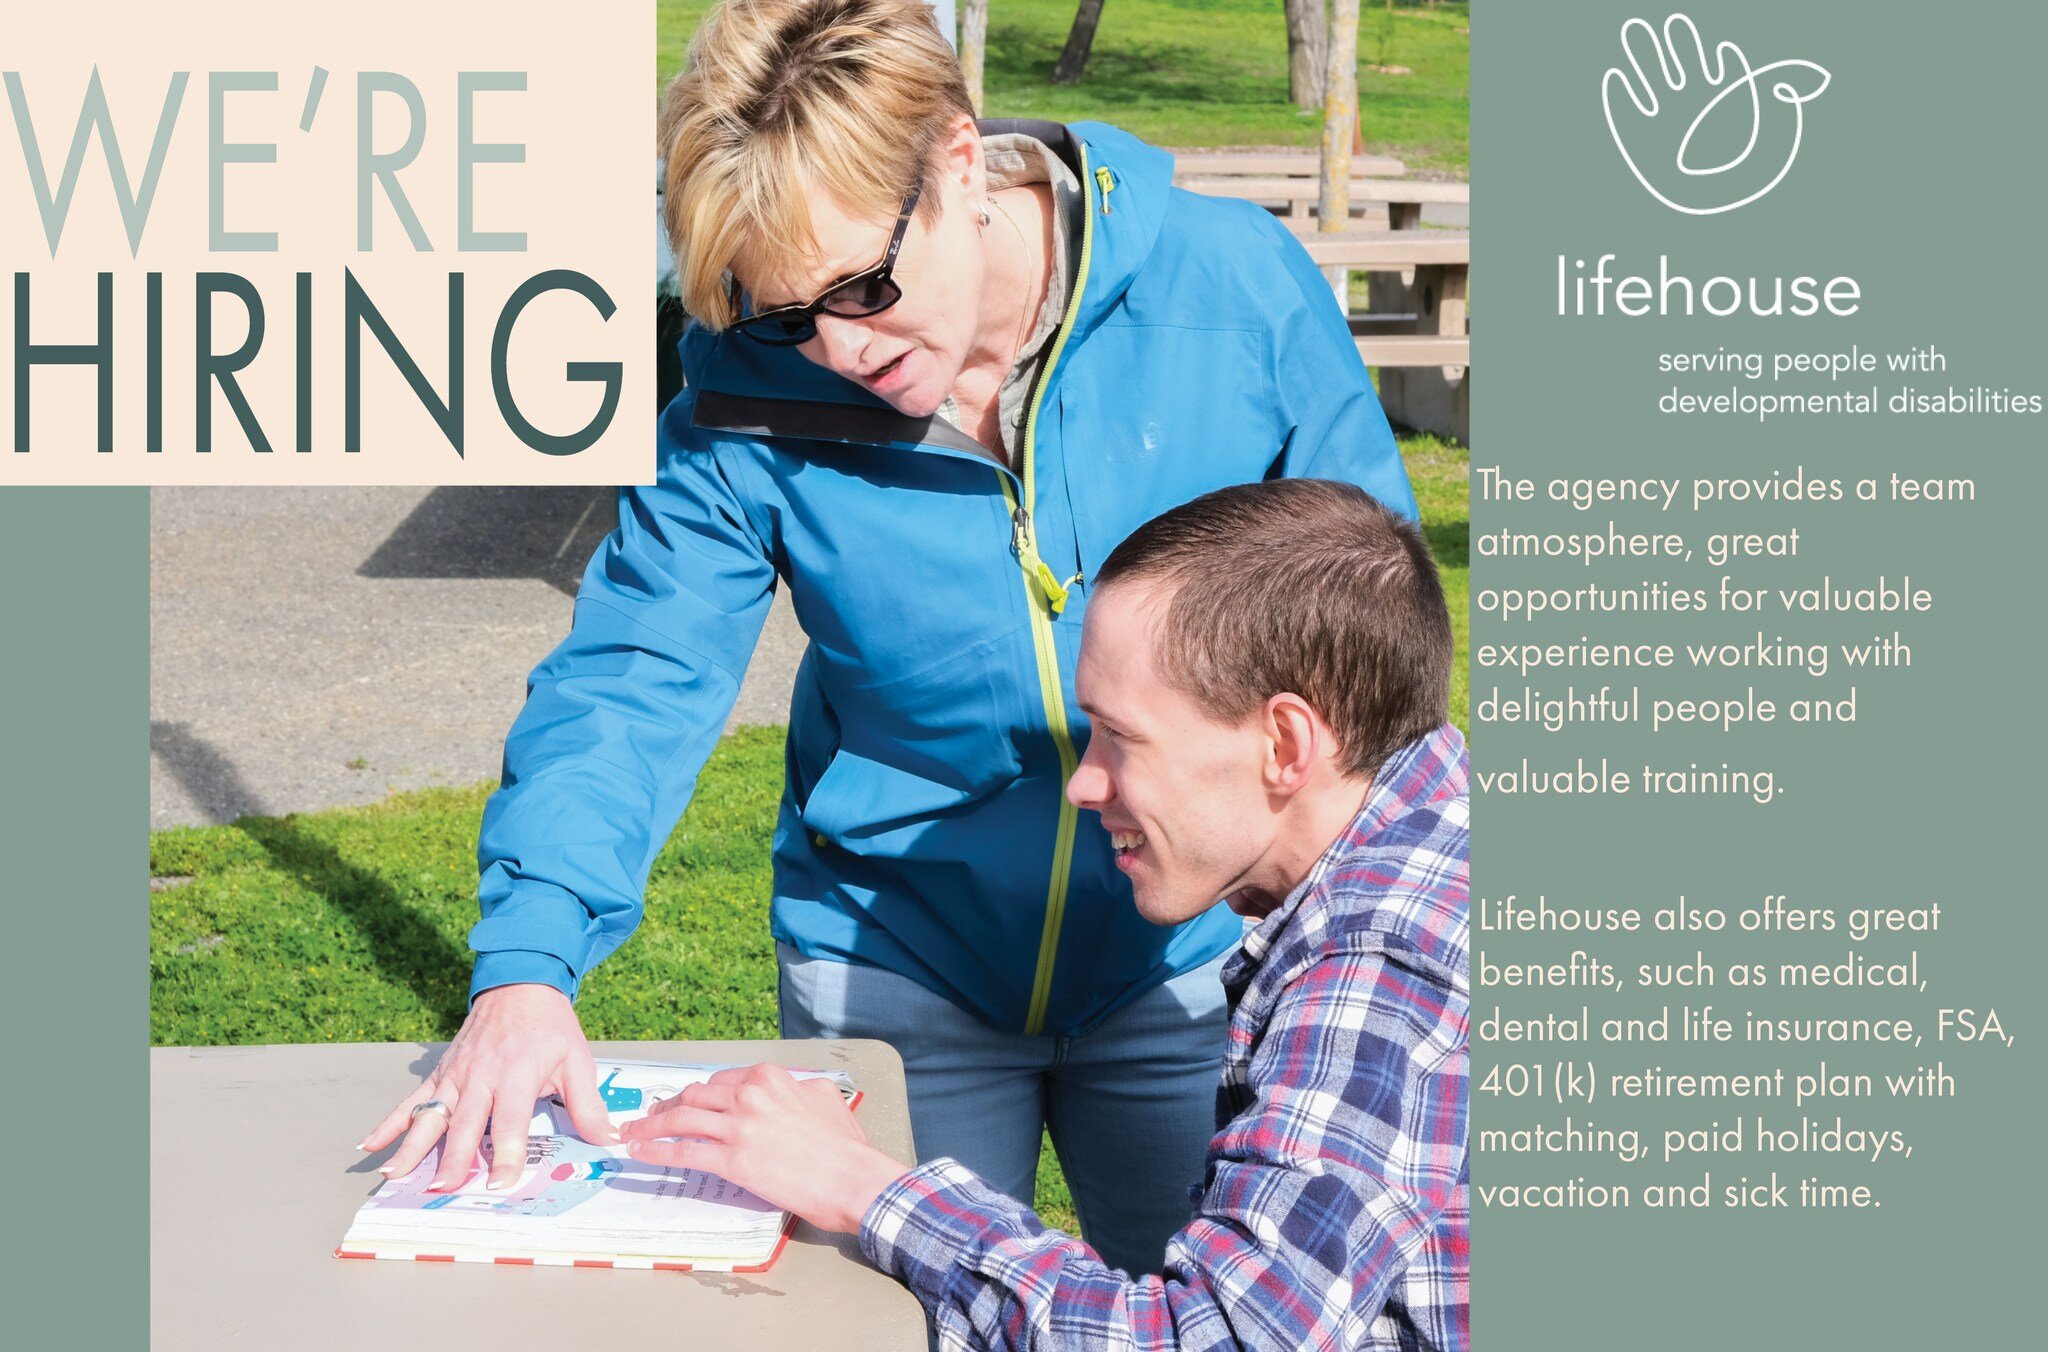 Lifehouse is looking for a Supported Living Program Manager to join us in our mission to change lives for people with developmental disabilities!

As a Manager in our Supported Living Program, you will oversee the design and implementation of Support